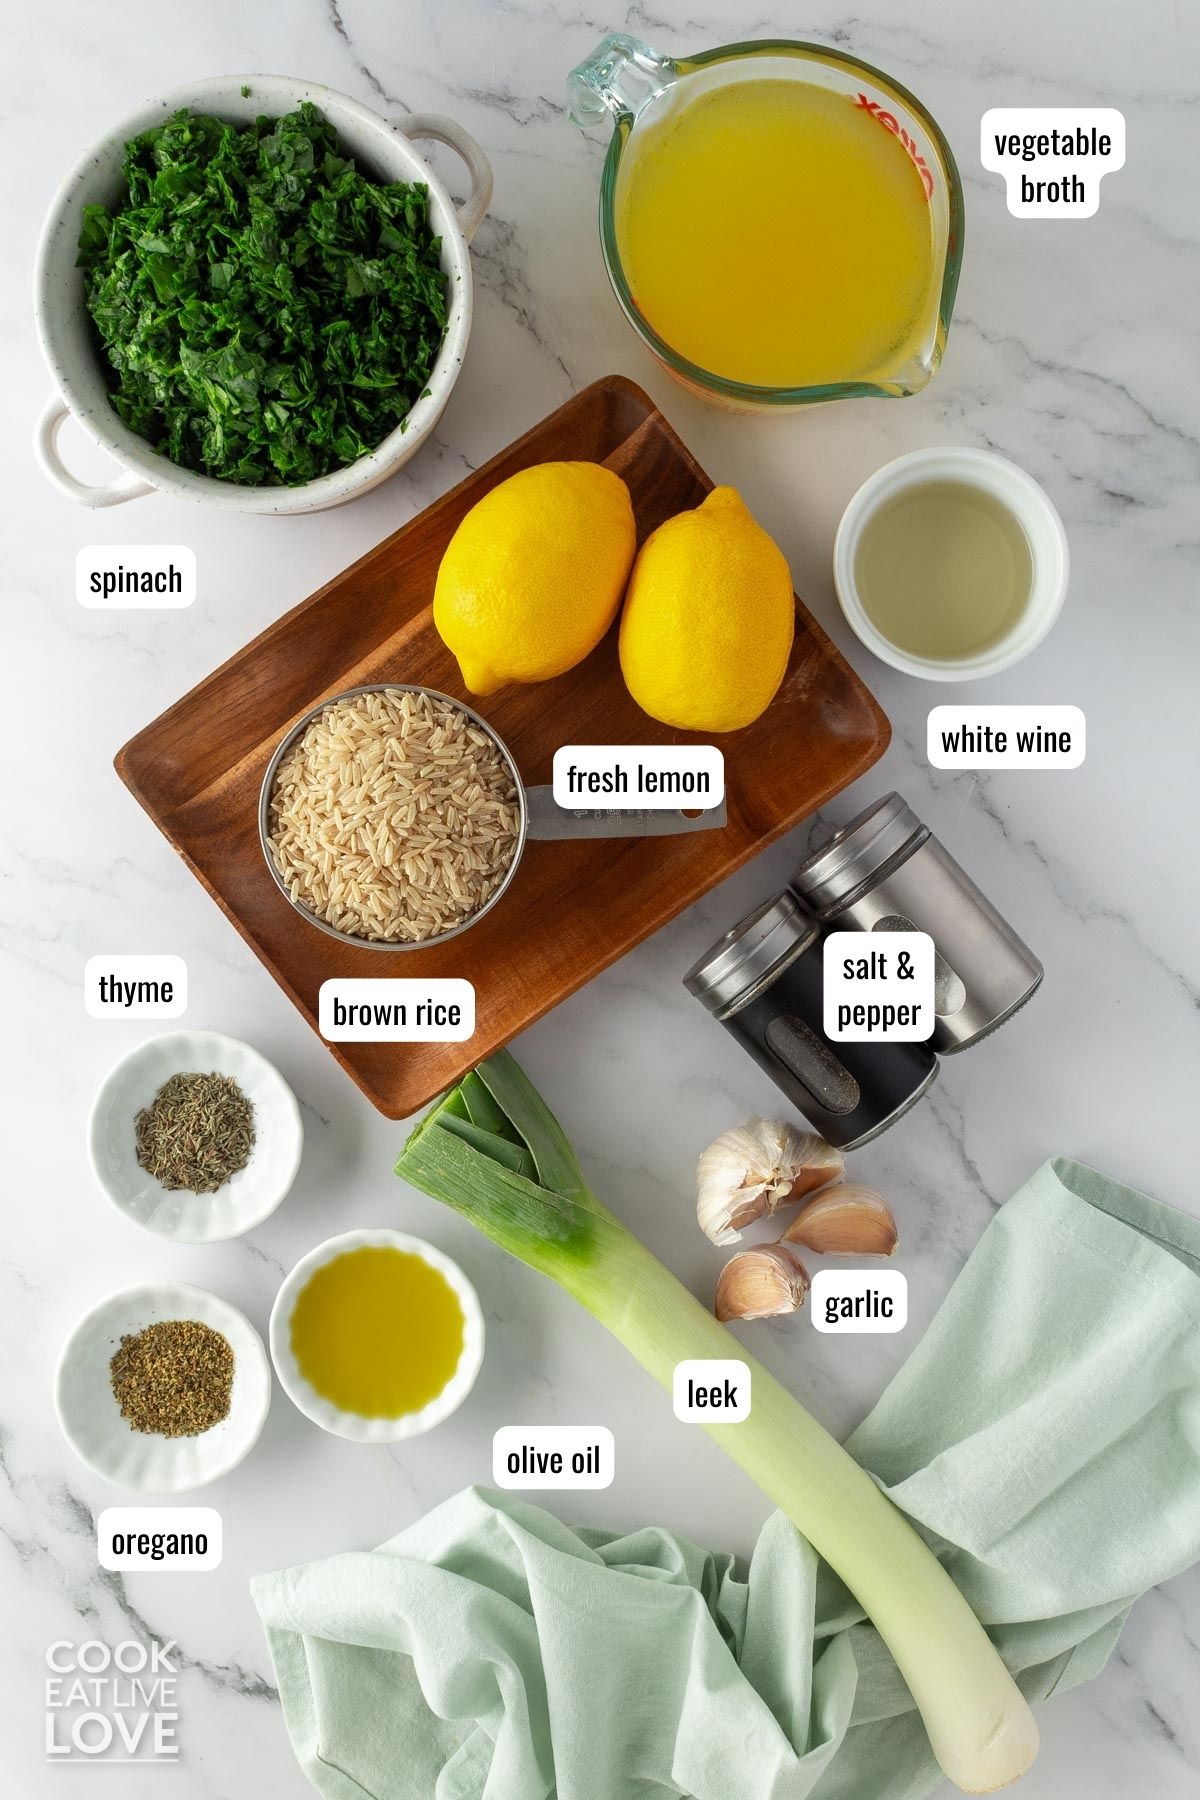 Ingredients to make spinach rice on the table before preparing.